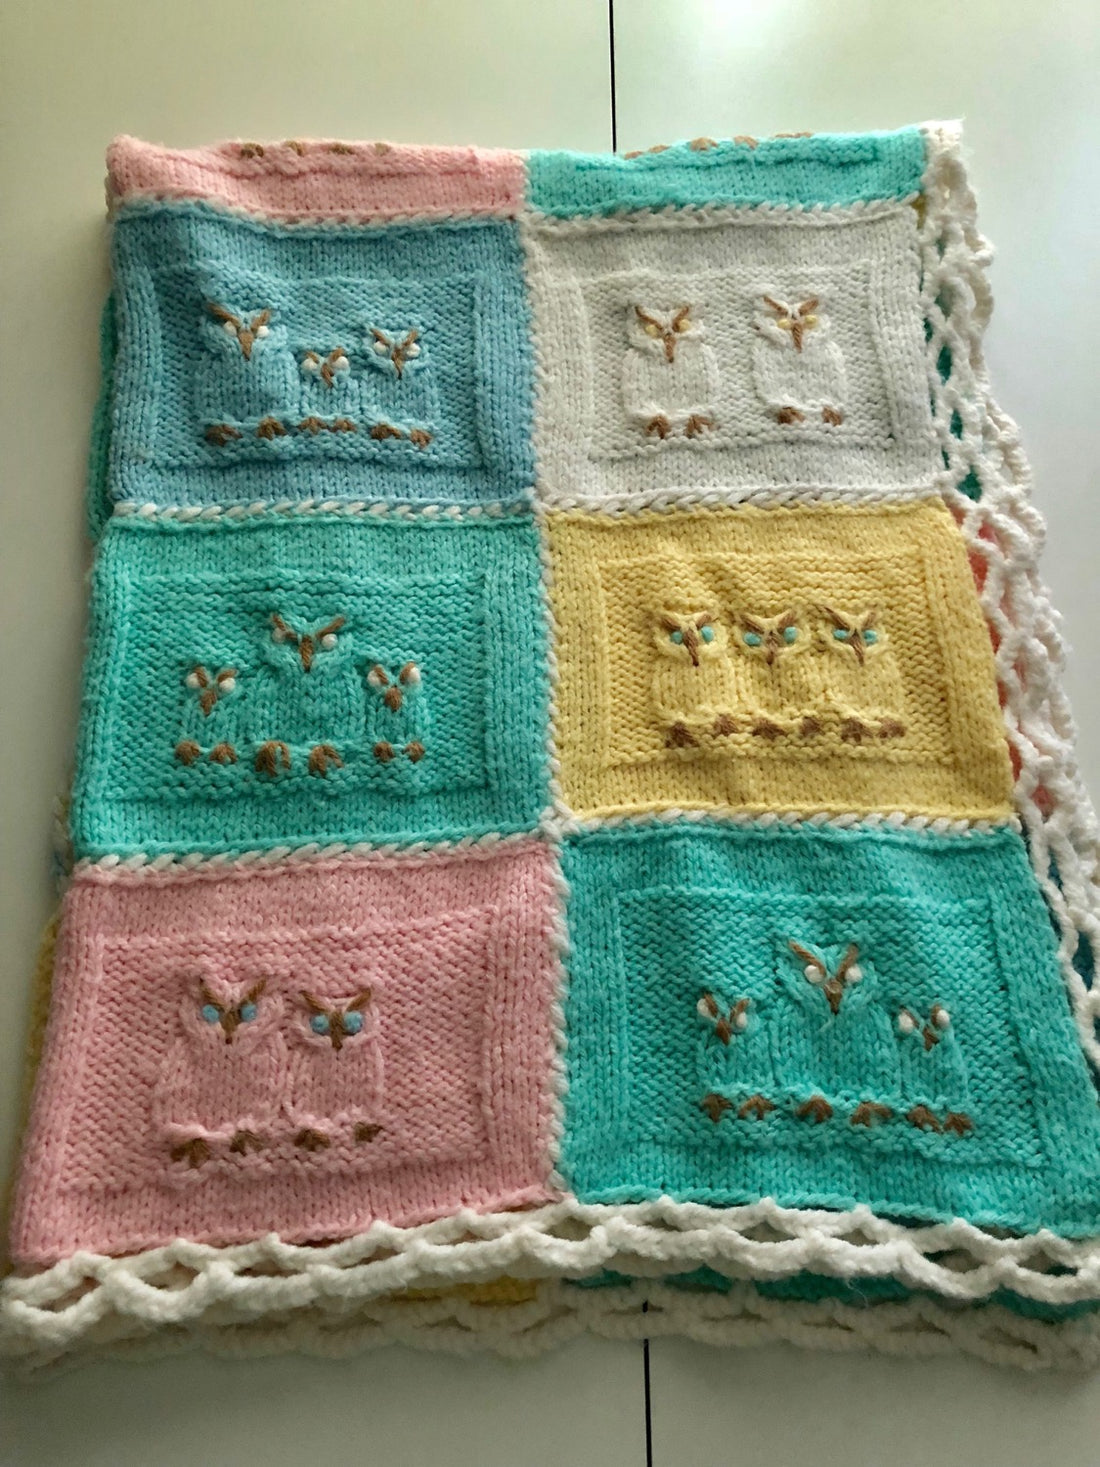 Owl Blanket is Finally Done